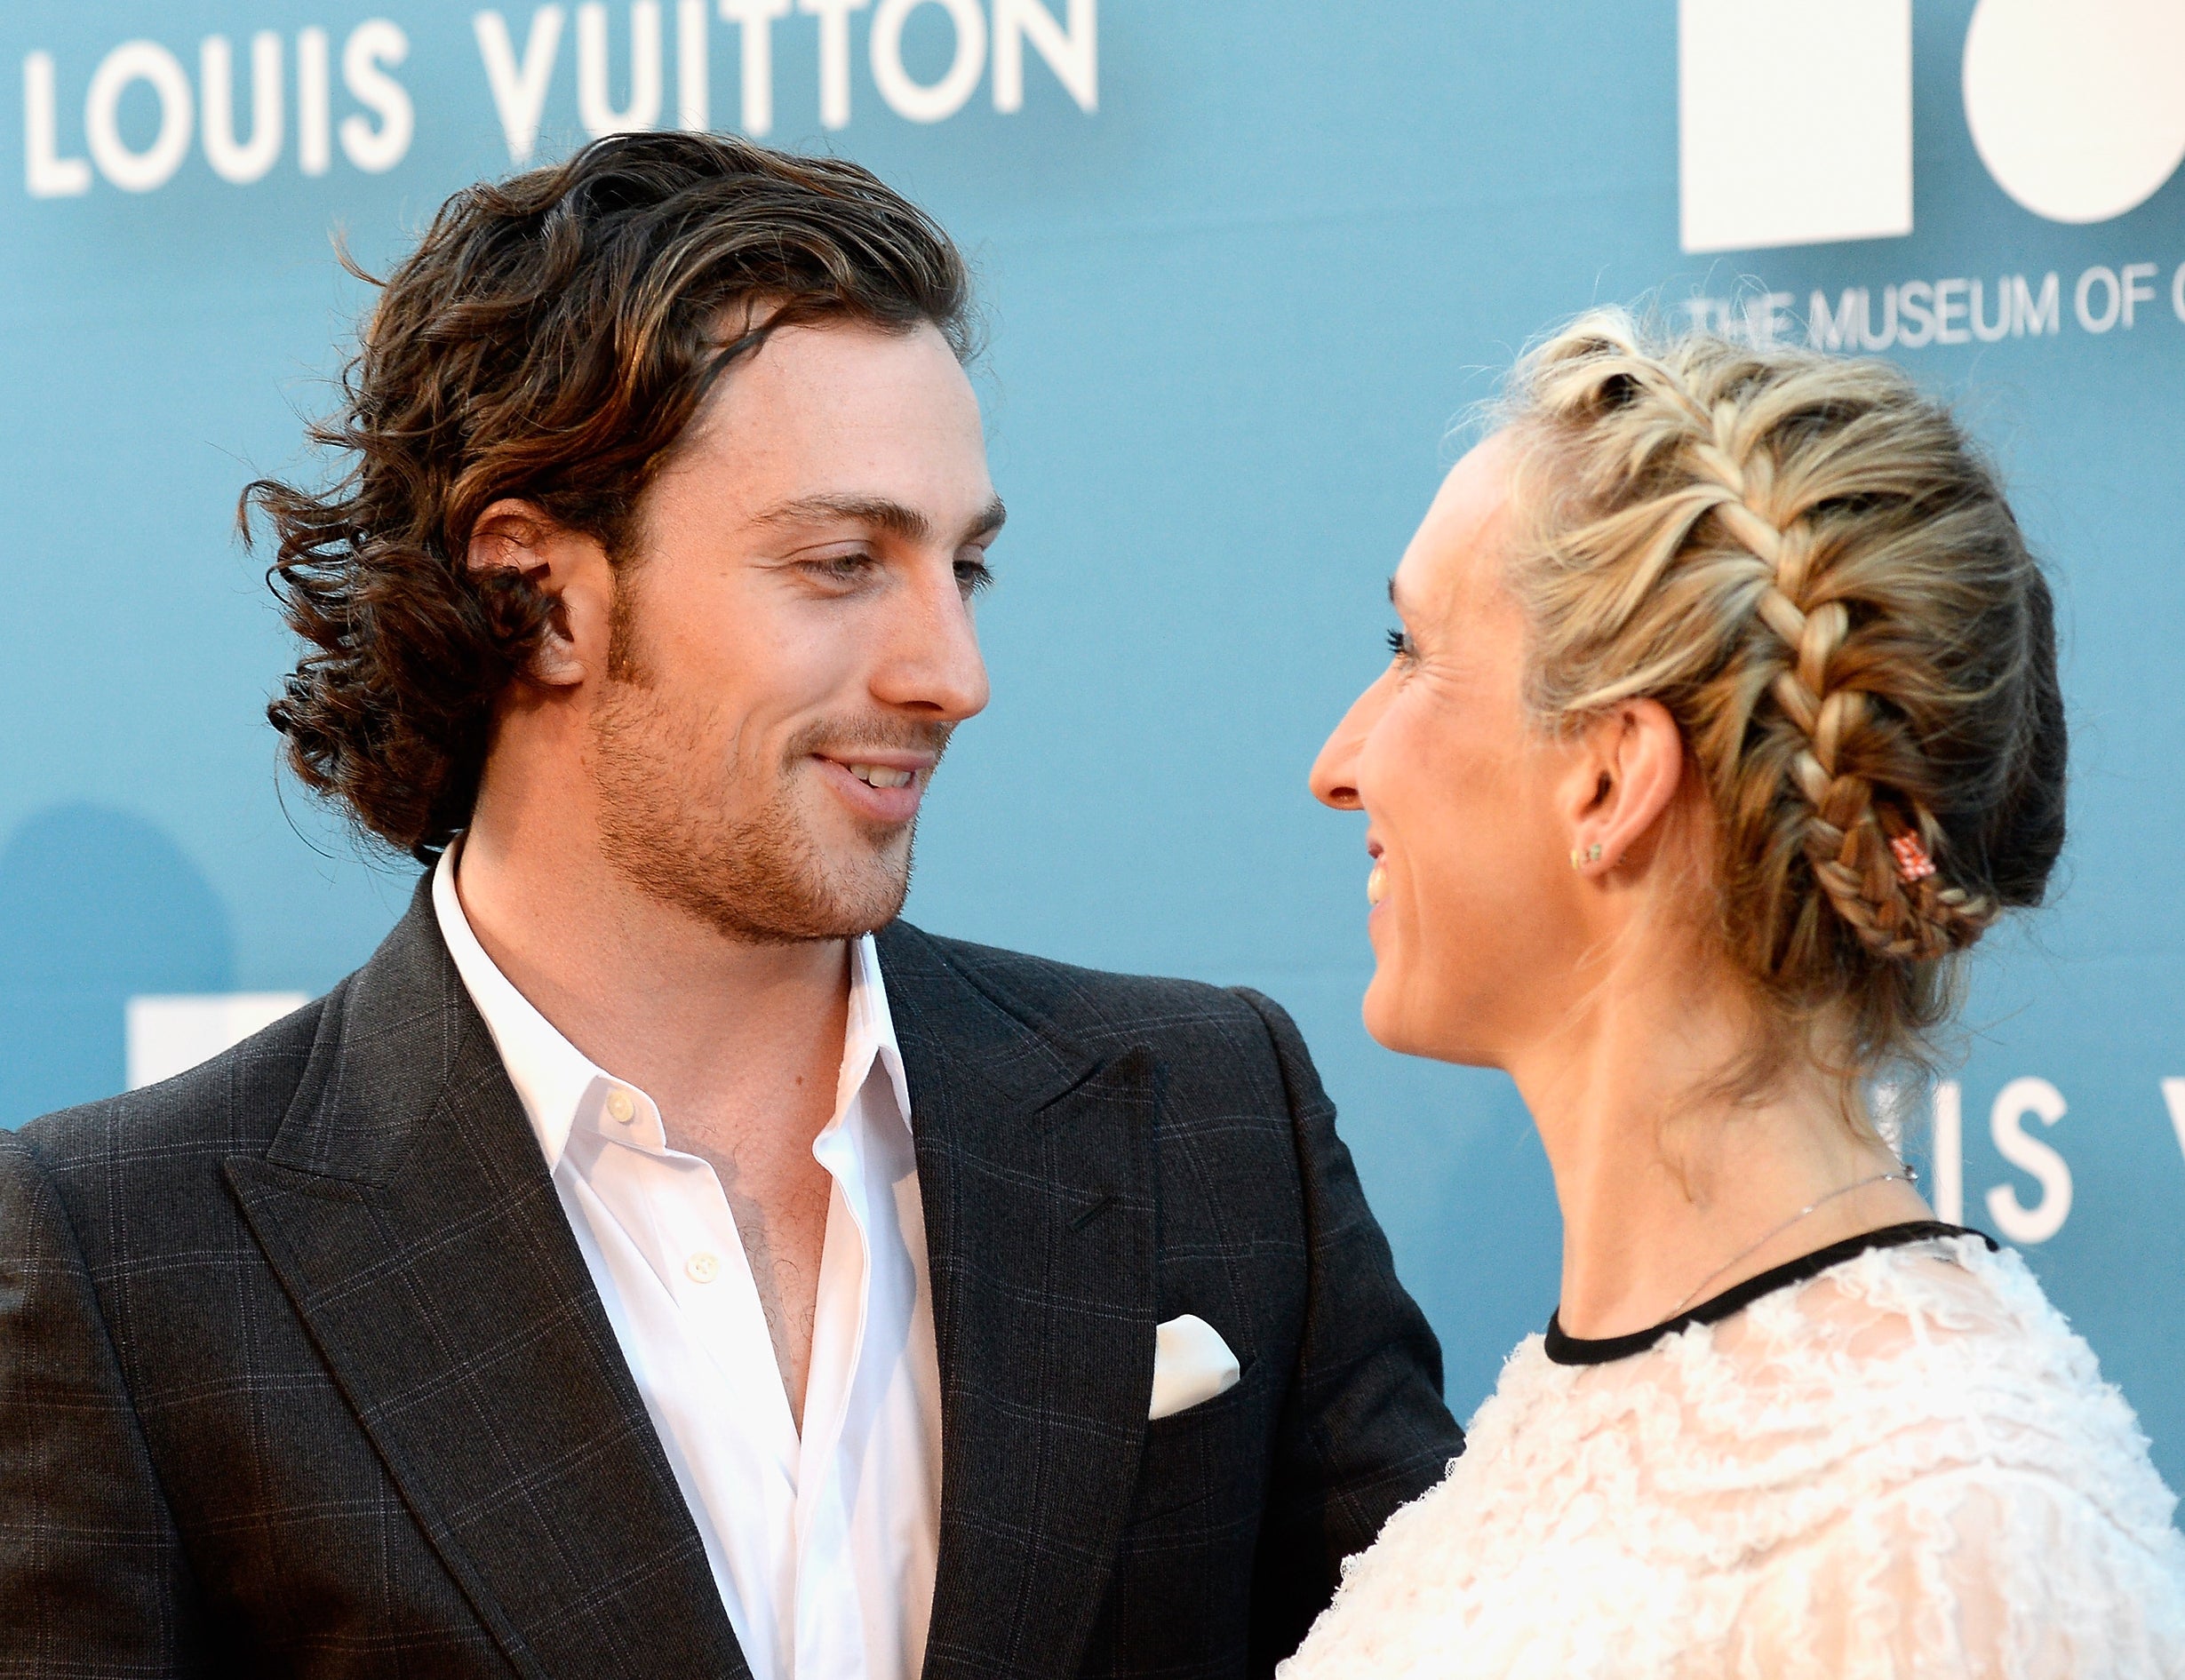 The couple smiling at each other, he in a suit and she in textured dress, at a media event